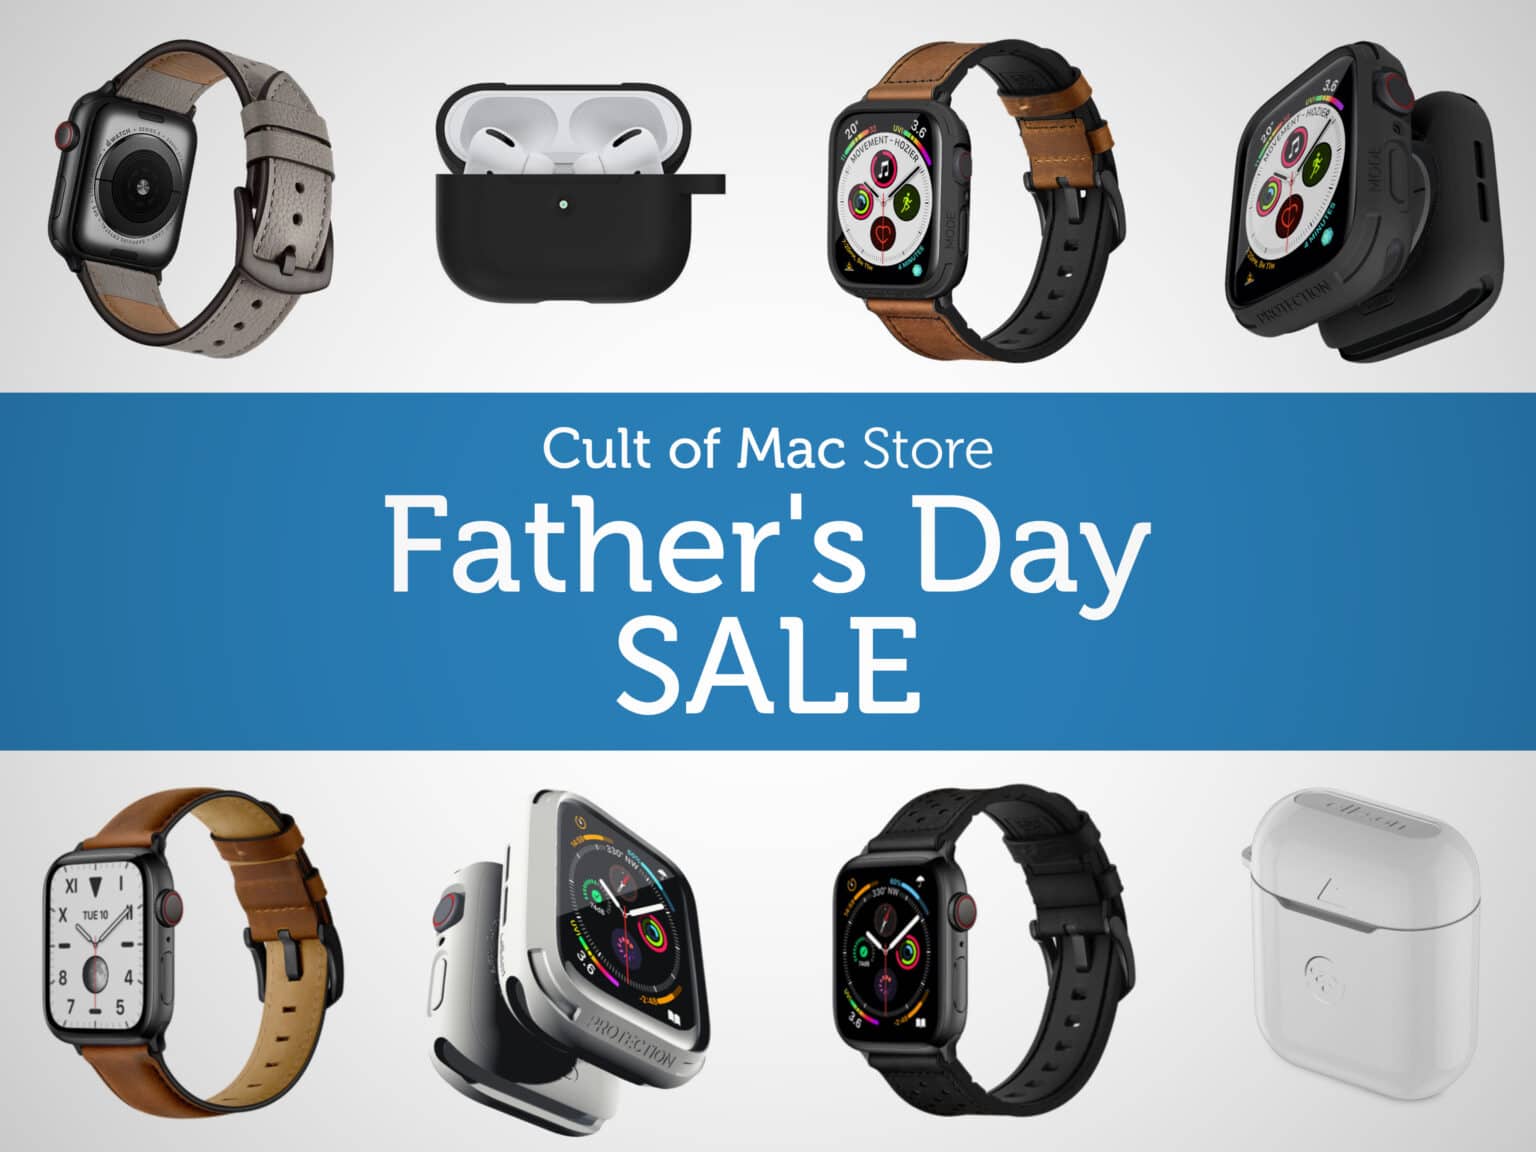 Cult of Mac Store Father's Day sale